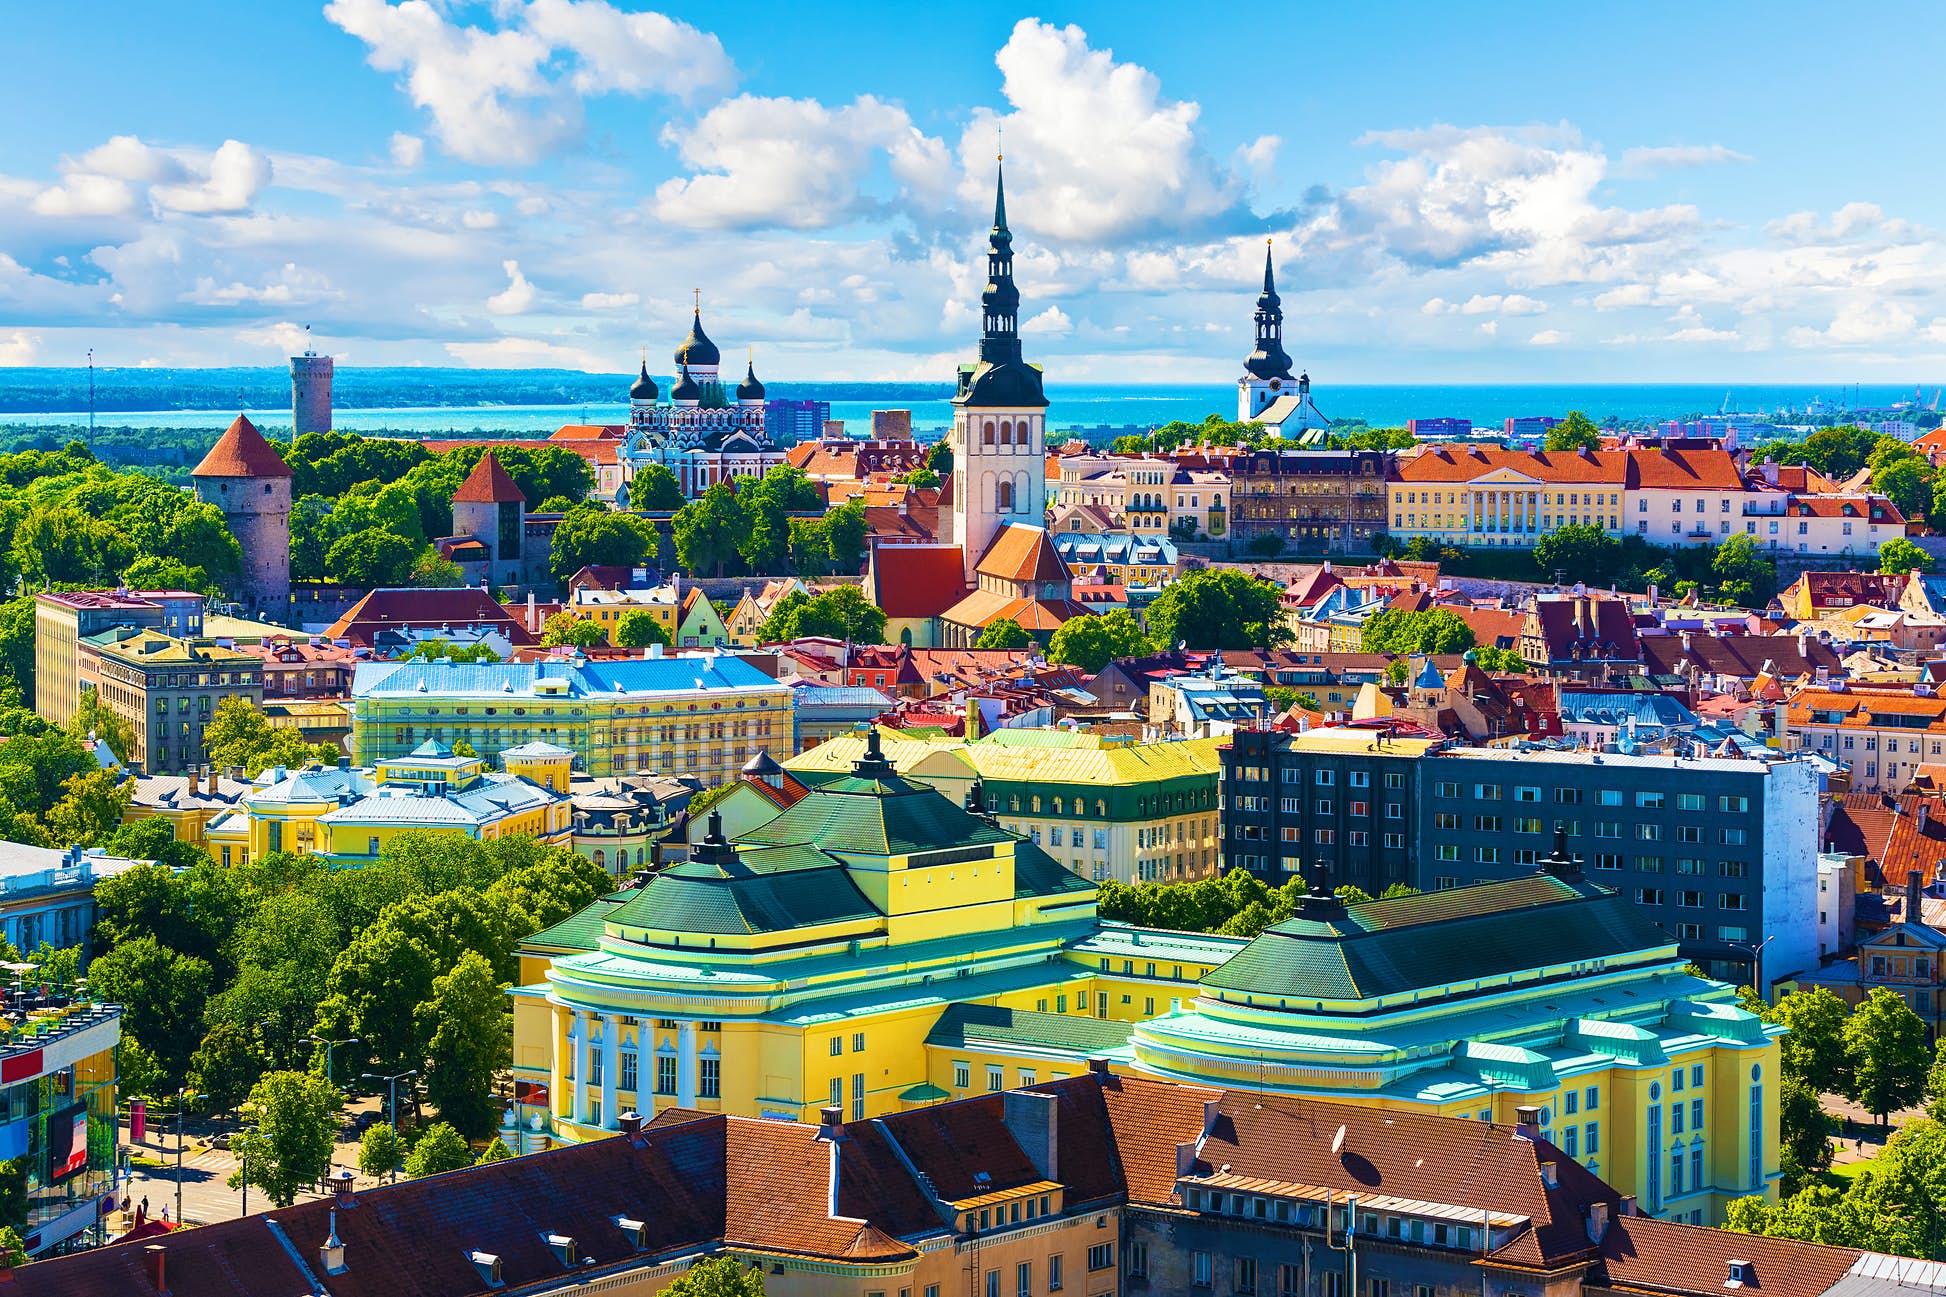 Scenic summer aerial view of the Old Town architecture in Tallinn, Estonia ©Scanrail1/Shutterstock